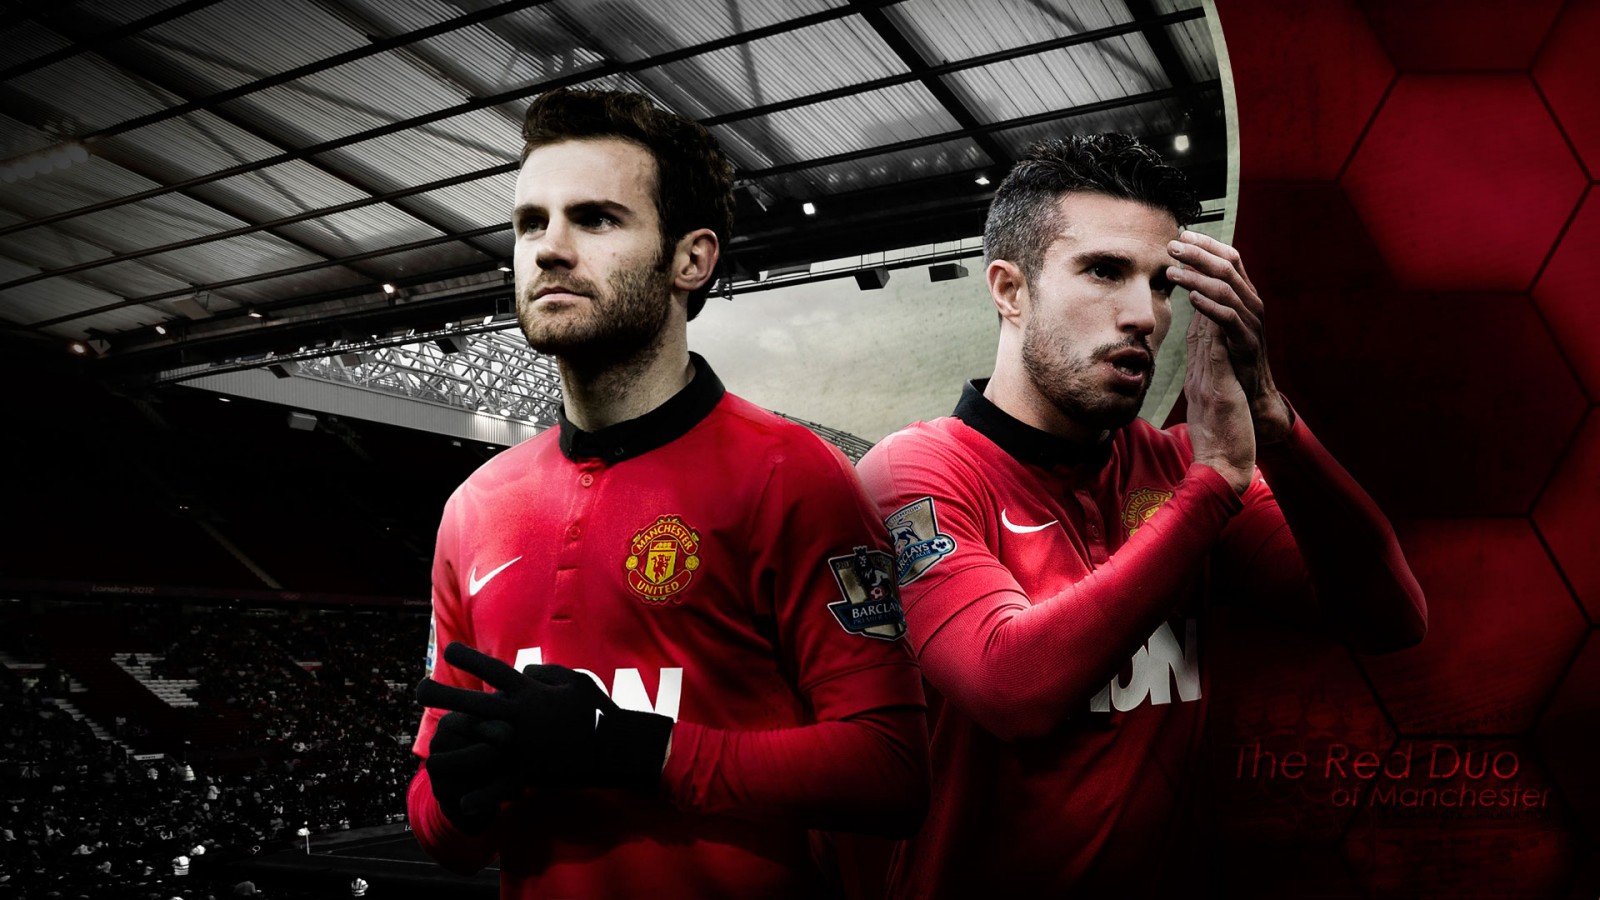 Image For Wallpaper Manchester United